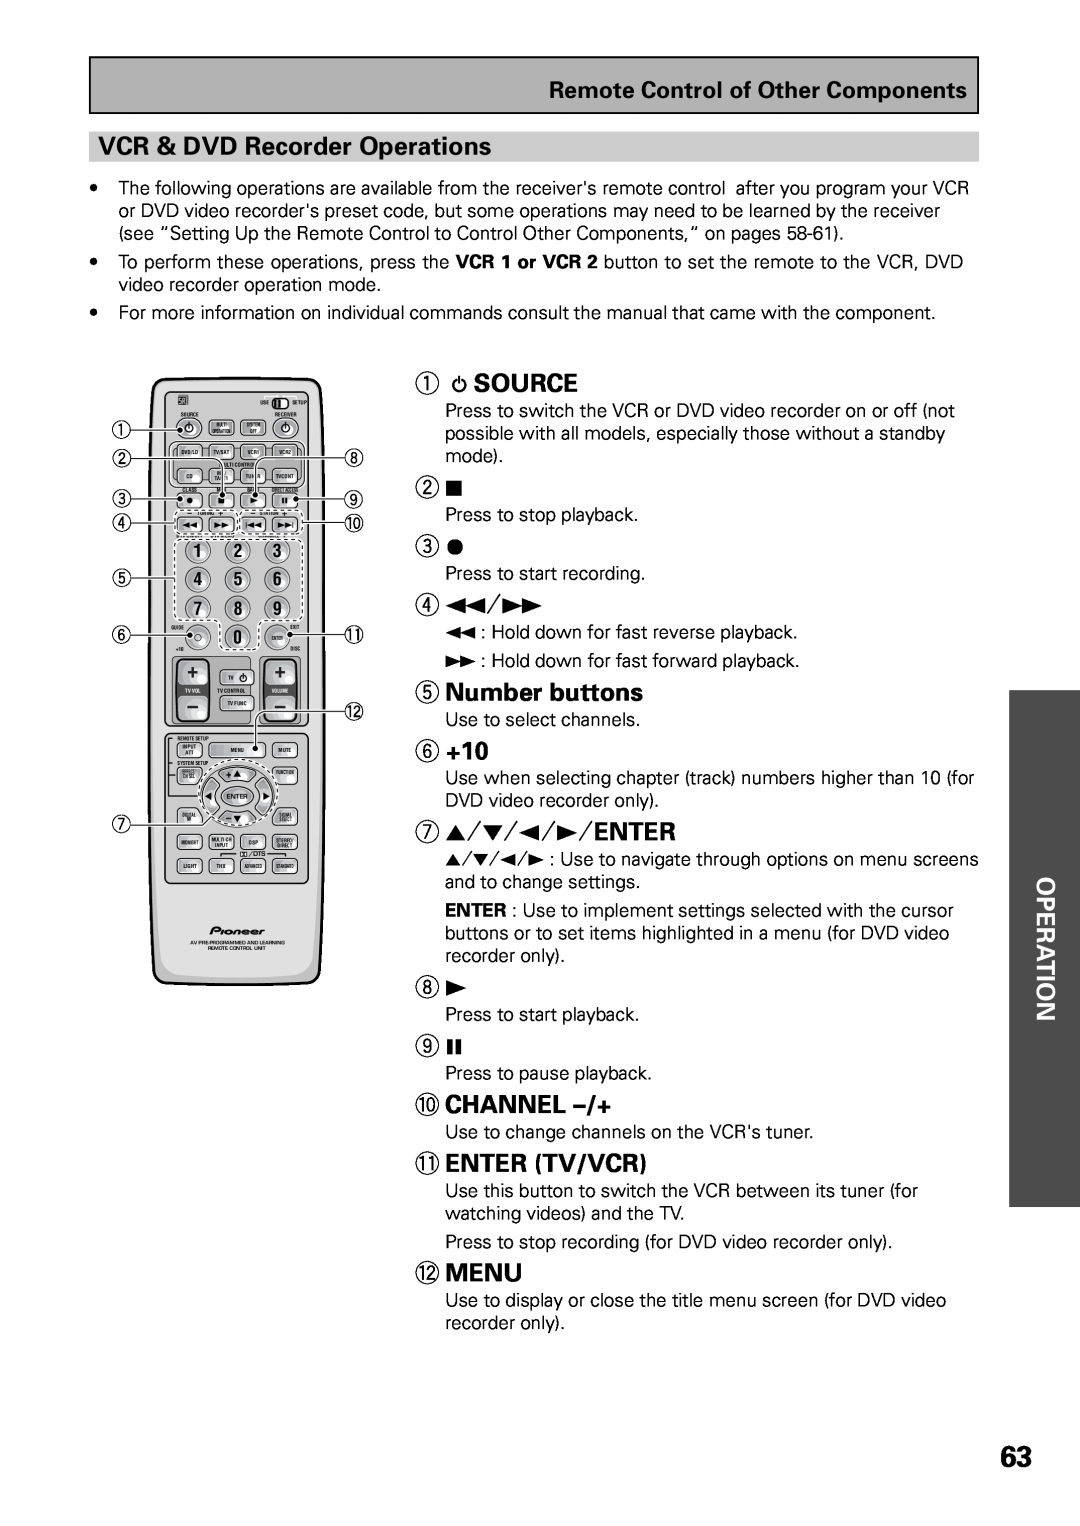 Pioneer VSX-37TX VCR & DVD Recorder Operations, 1SOURCE, 6+10, 0CHANNEL –/+, Enter Tv/Vcr, 4 1÷Á, Number buttons, =Menu 